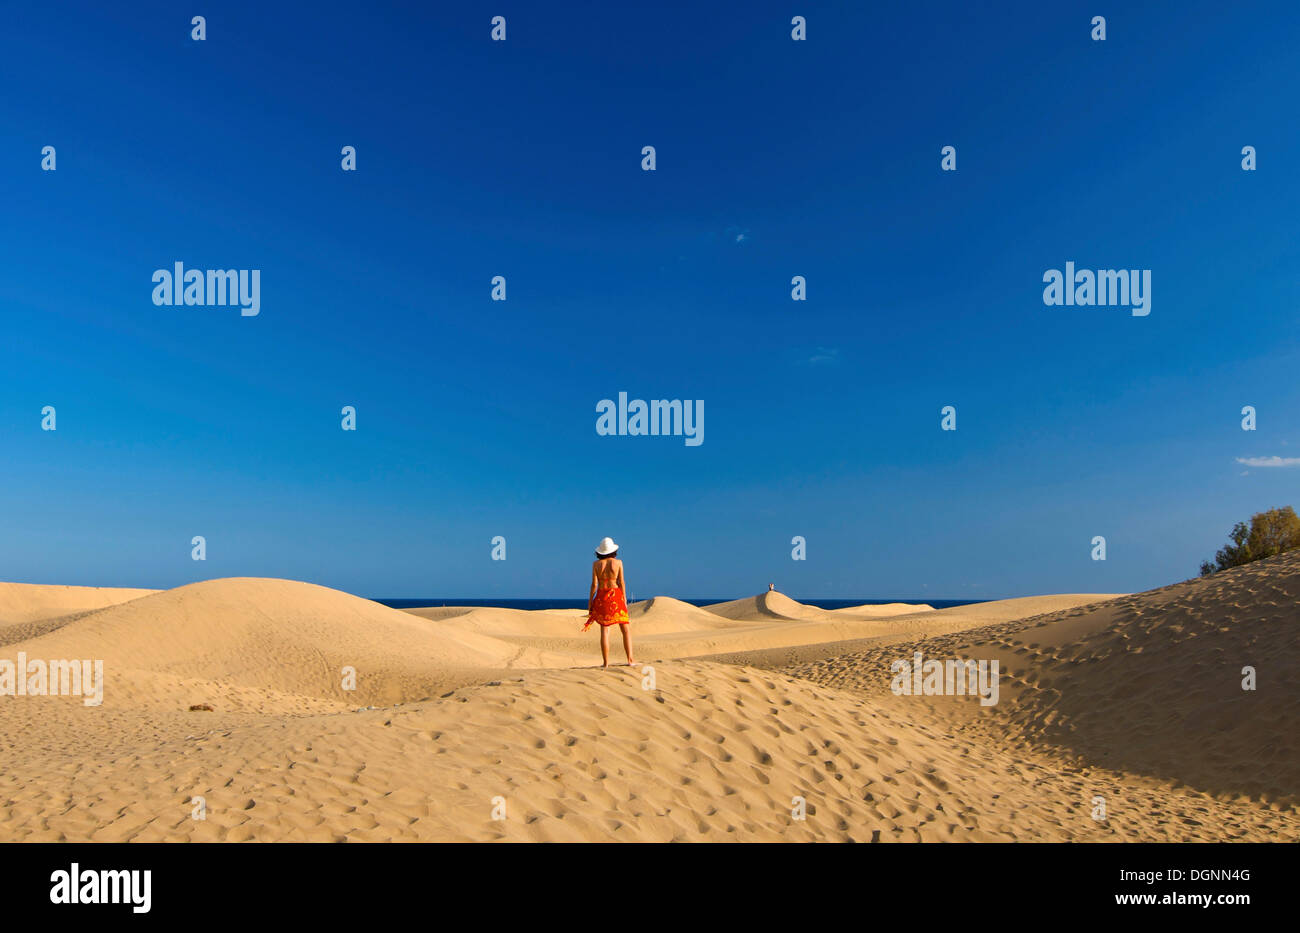 Woman in front of sand dunes of Maspalomas, Gran Canaria, Canary Islands, Spain Stock Photo